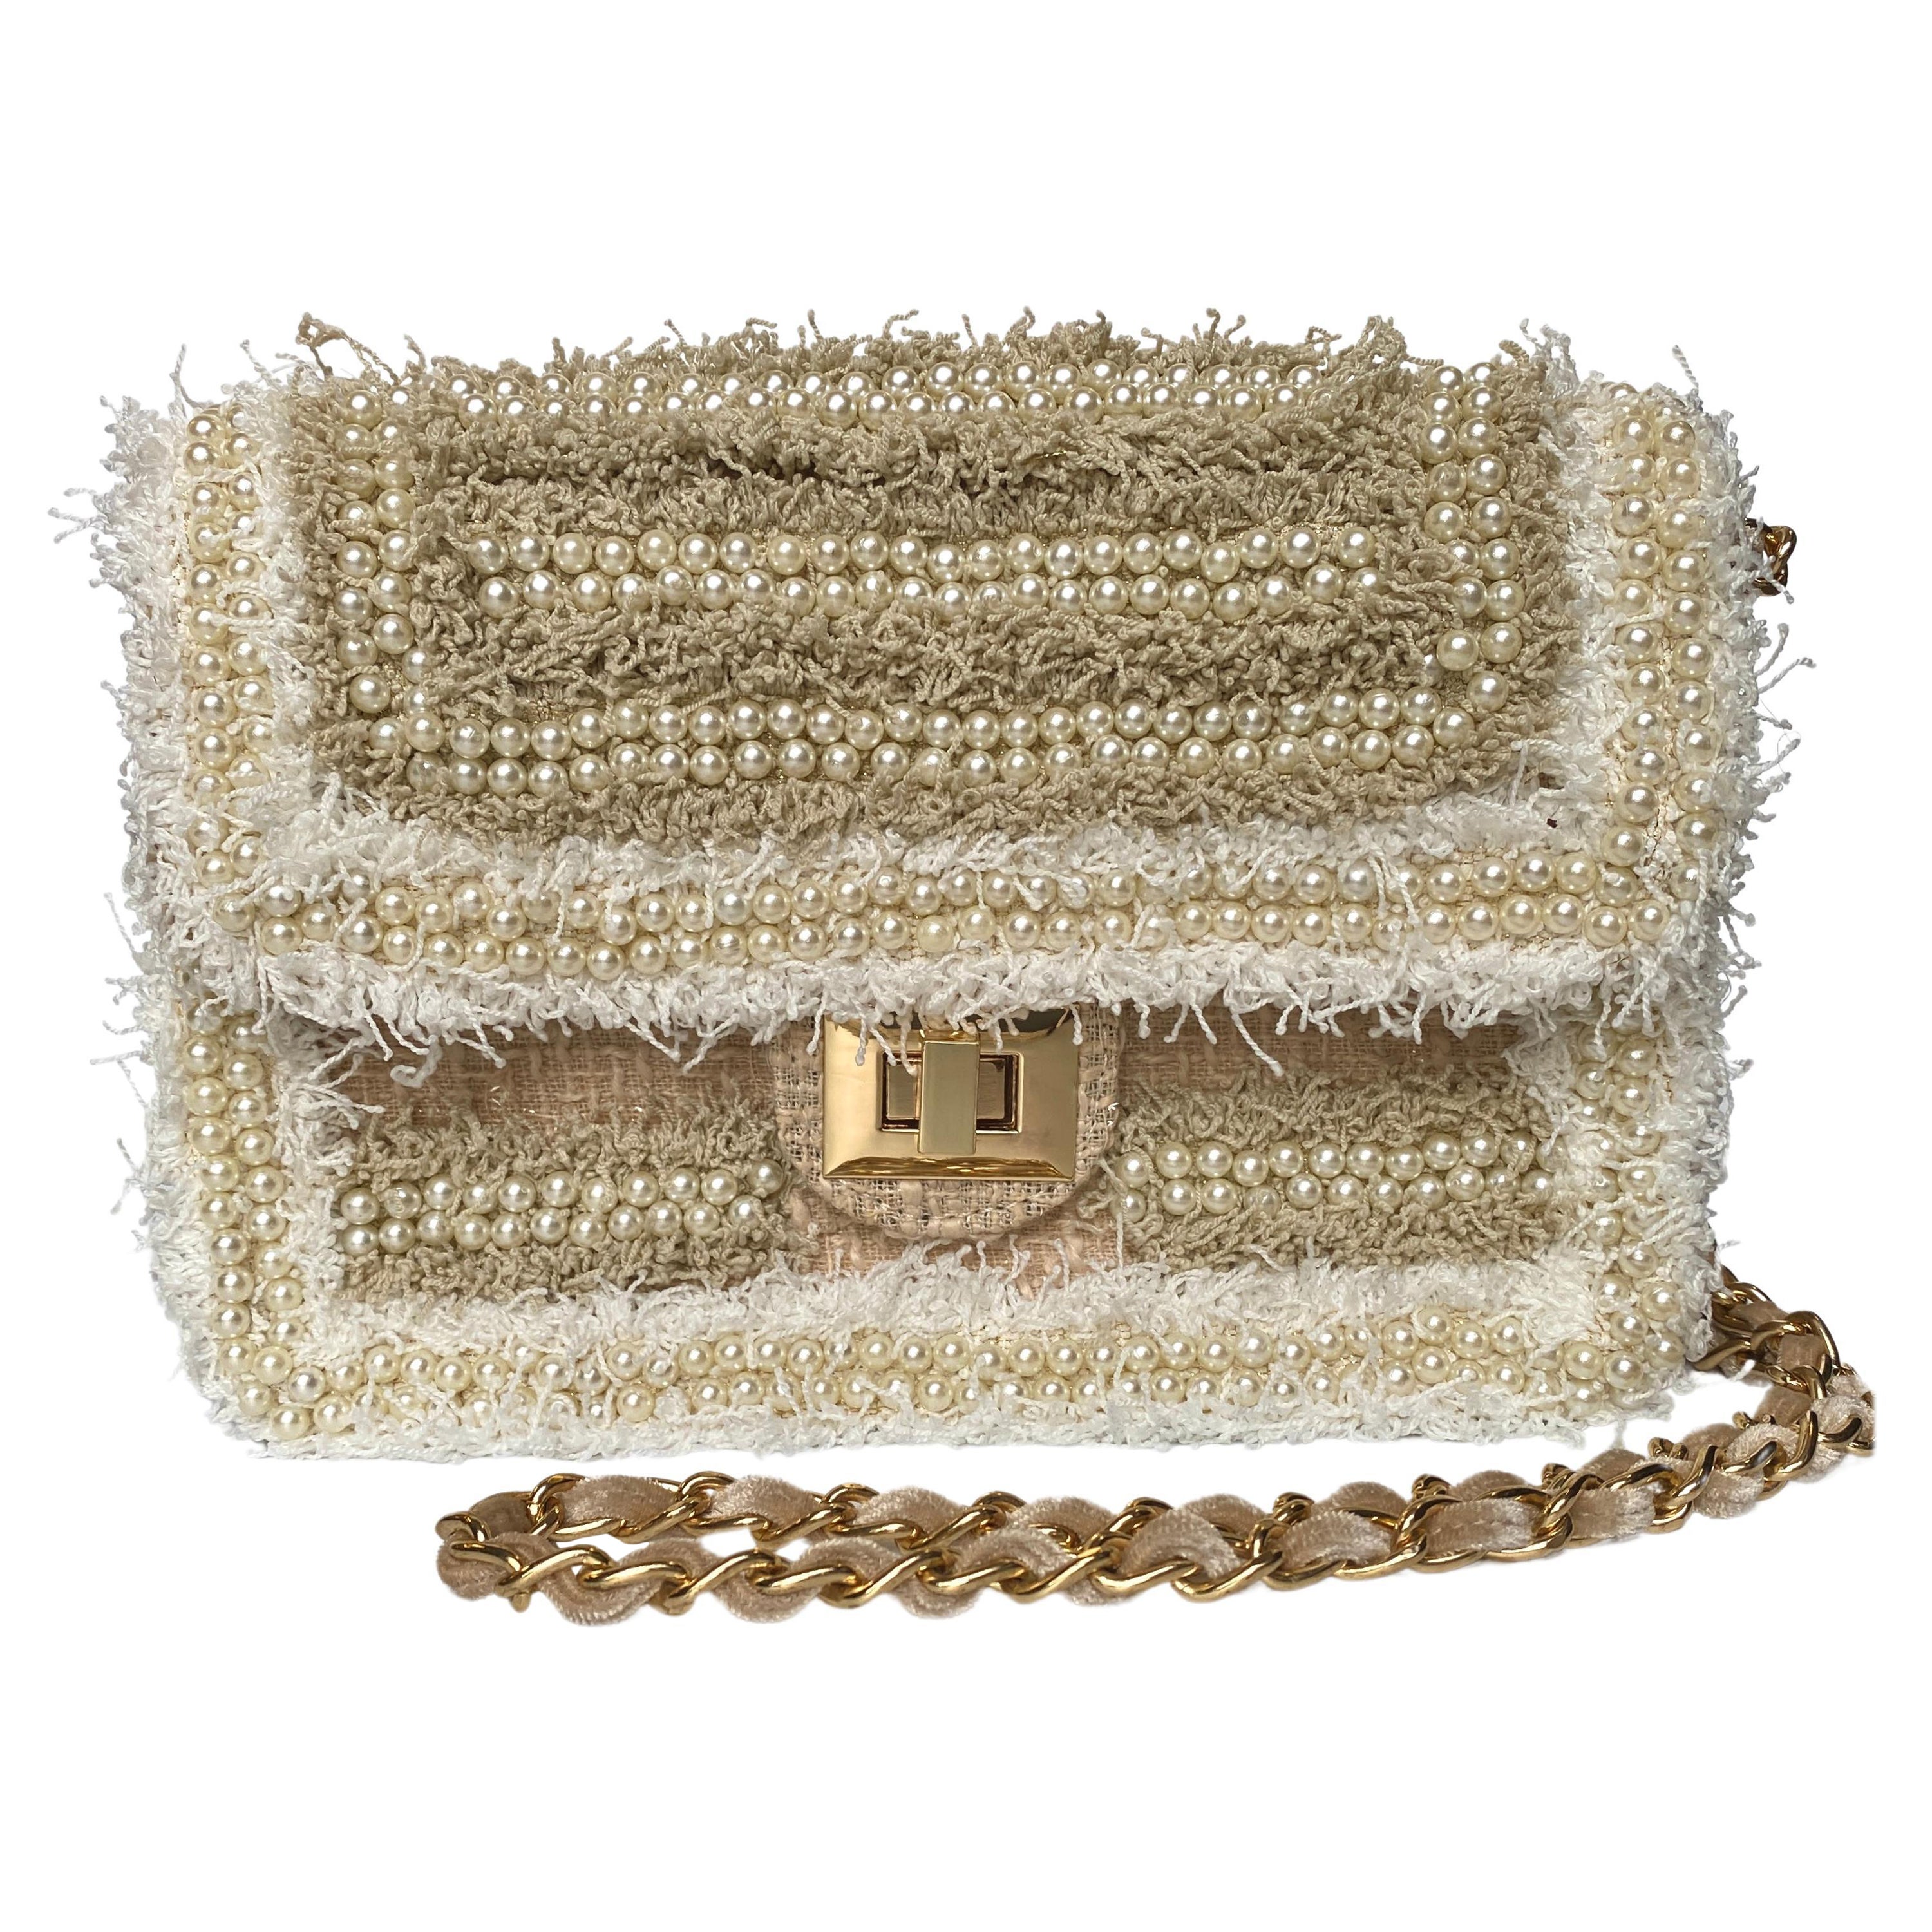 Beige & White Faux Pearl  Woven Crossbody Bag  For Sale